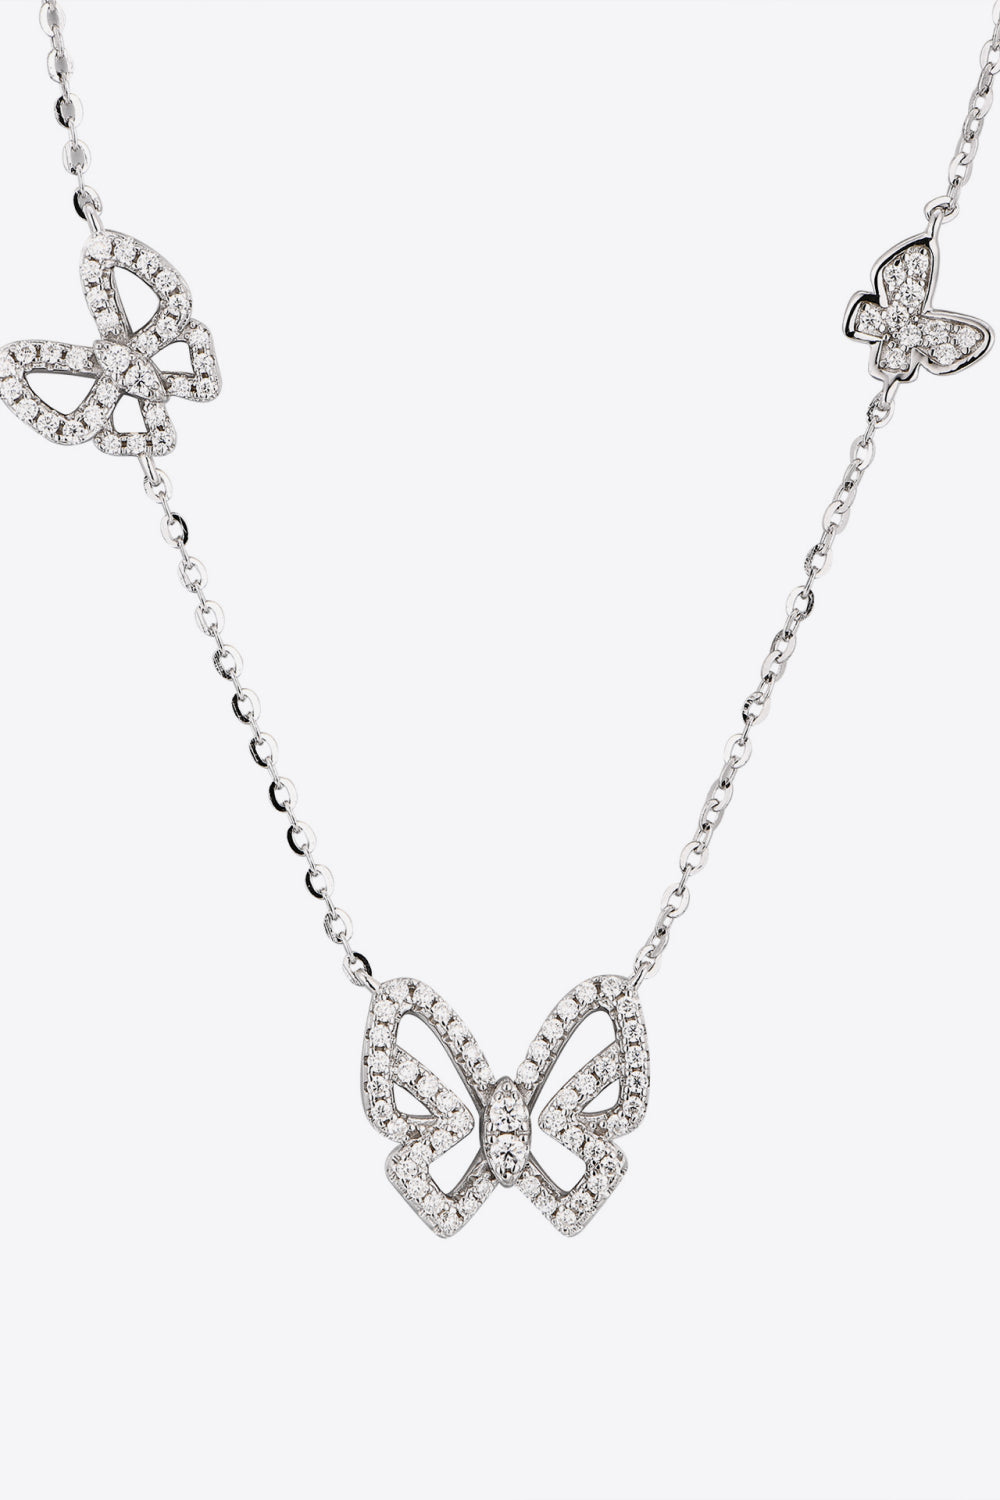 Moissanite Butterfly Shape Necklace-Necklaces-Inspired by Justeen-Women's Clothing Boutique